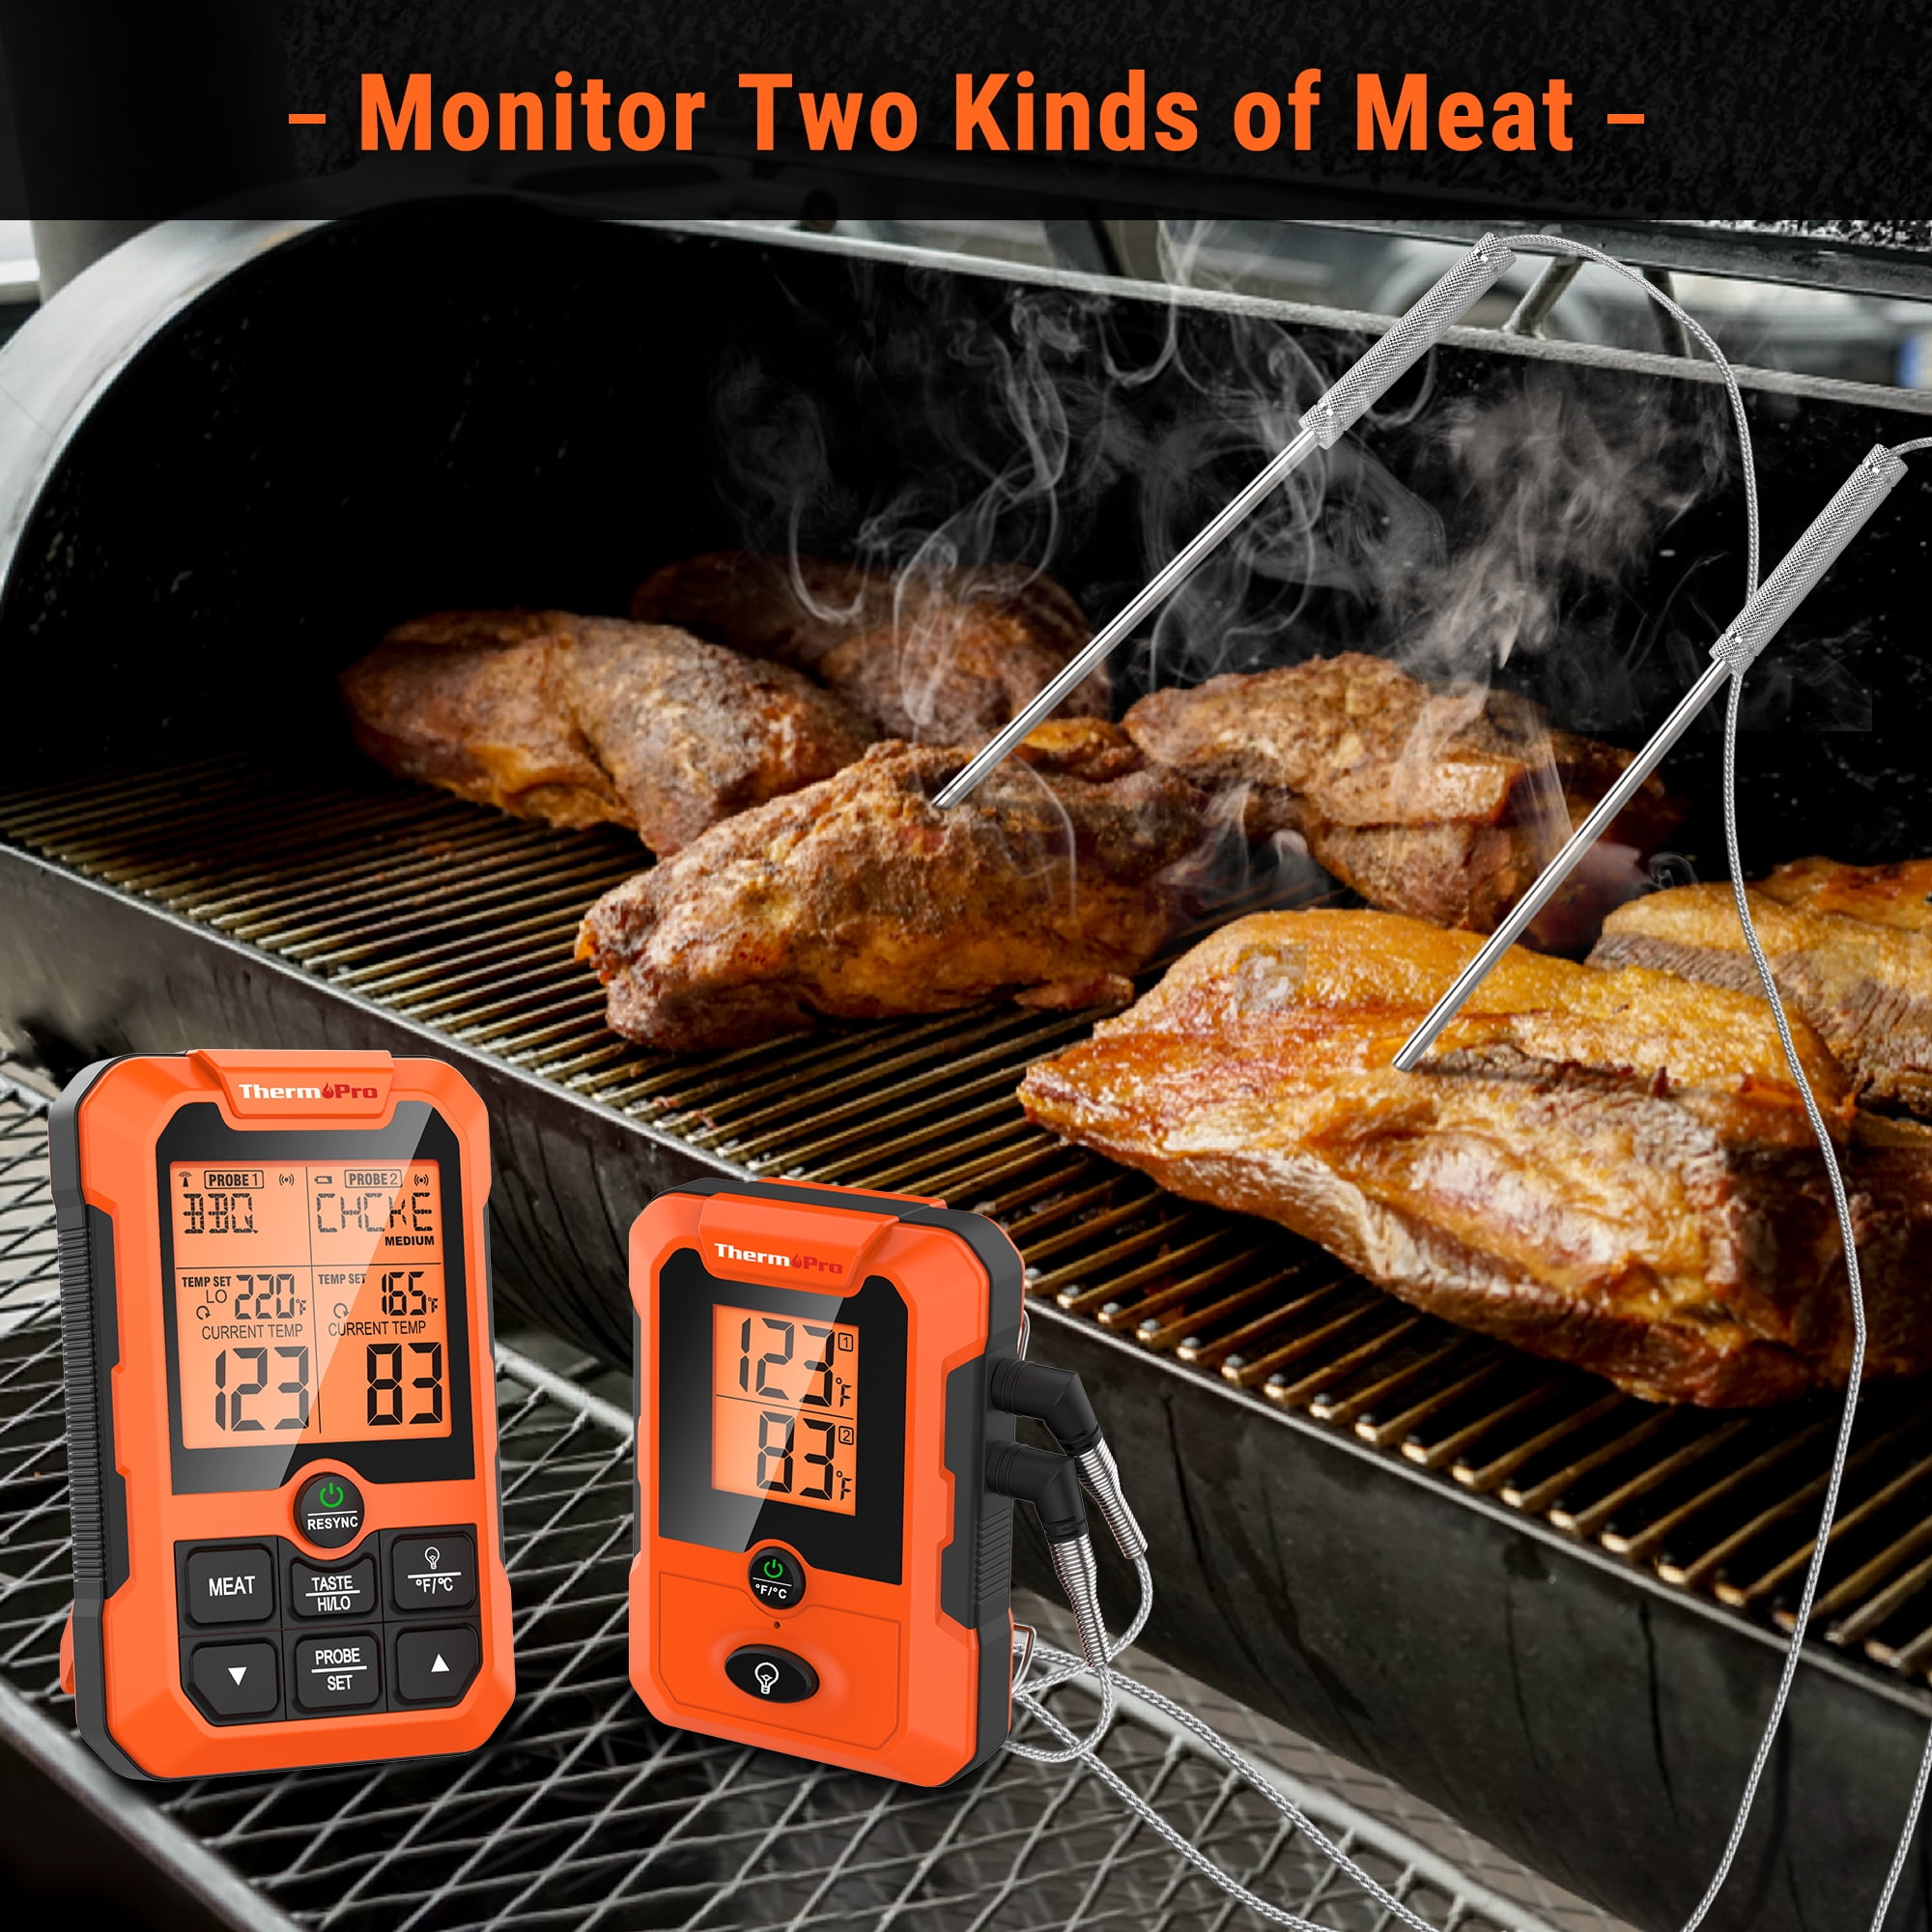 for Wireless Turkey Beef ThermoPro Dual Cooking Thermometer Meat Grill Dual Probe Fish Smoker Rechargeable BBQ Thermometer for Probes, Thermometer TP810W Oven, with of 500FT, Meat Smart Thermometer